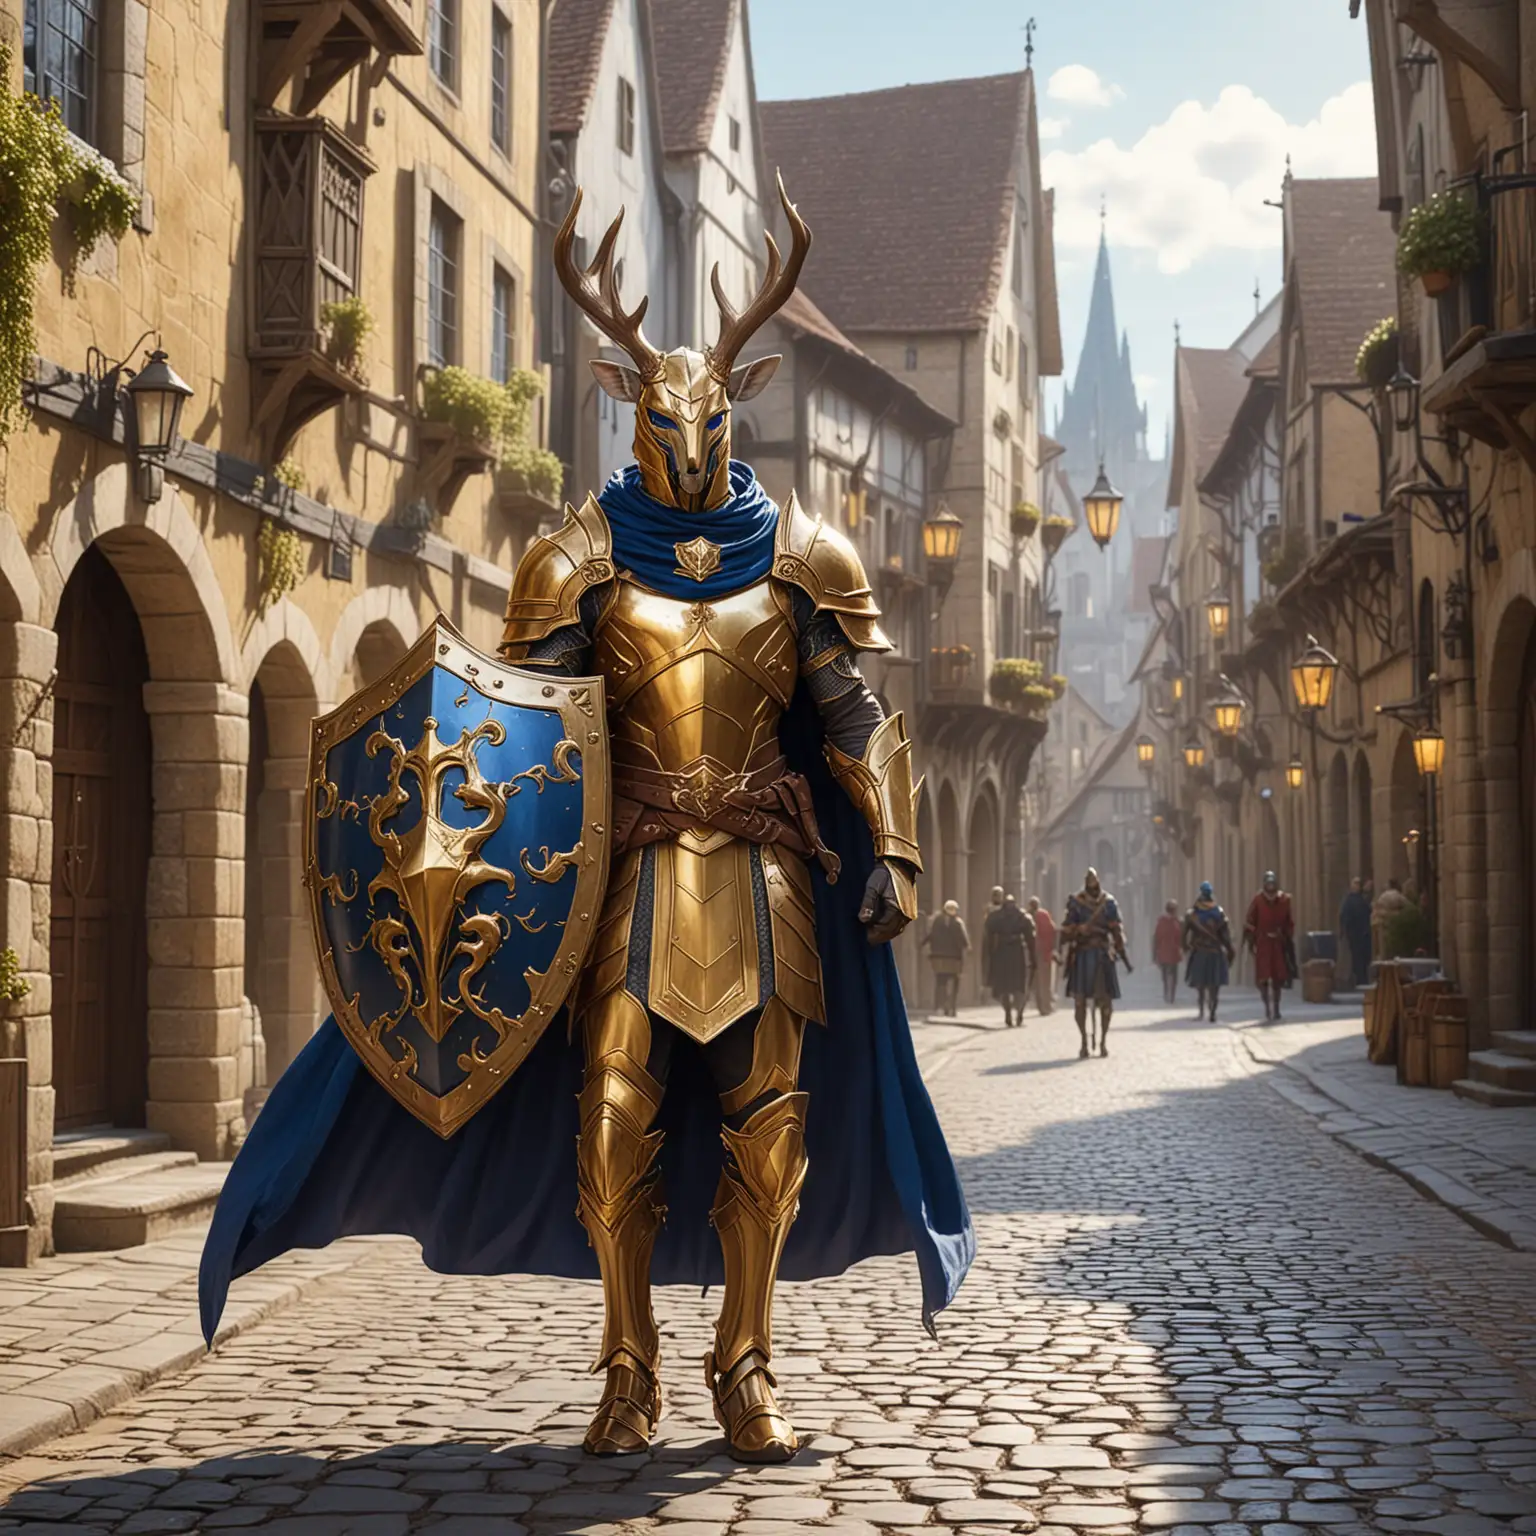 humanoid deer paladin in golden armor with royal blue cloak holding a large shield walking through a medieval town